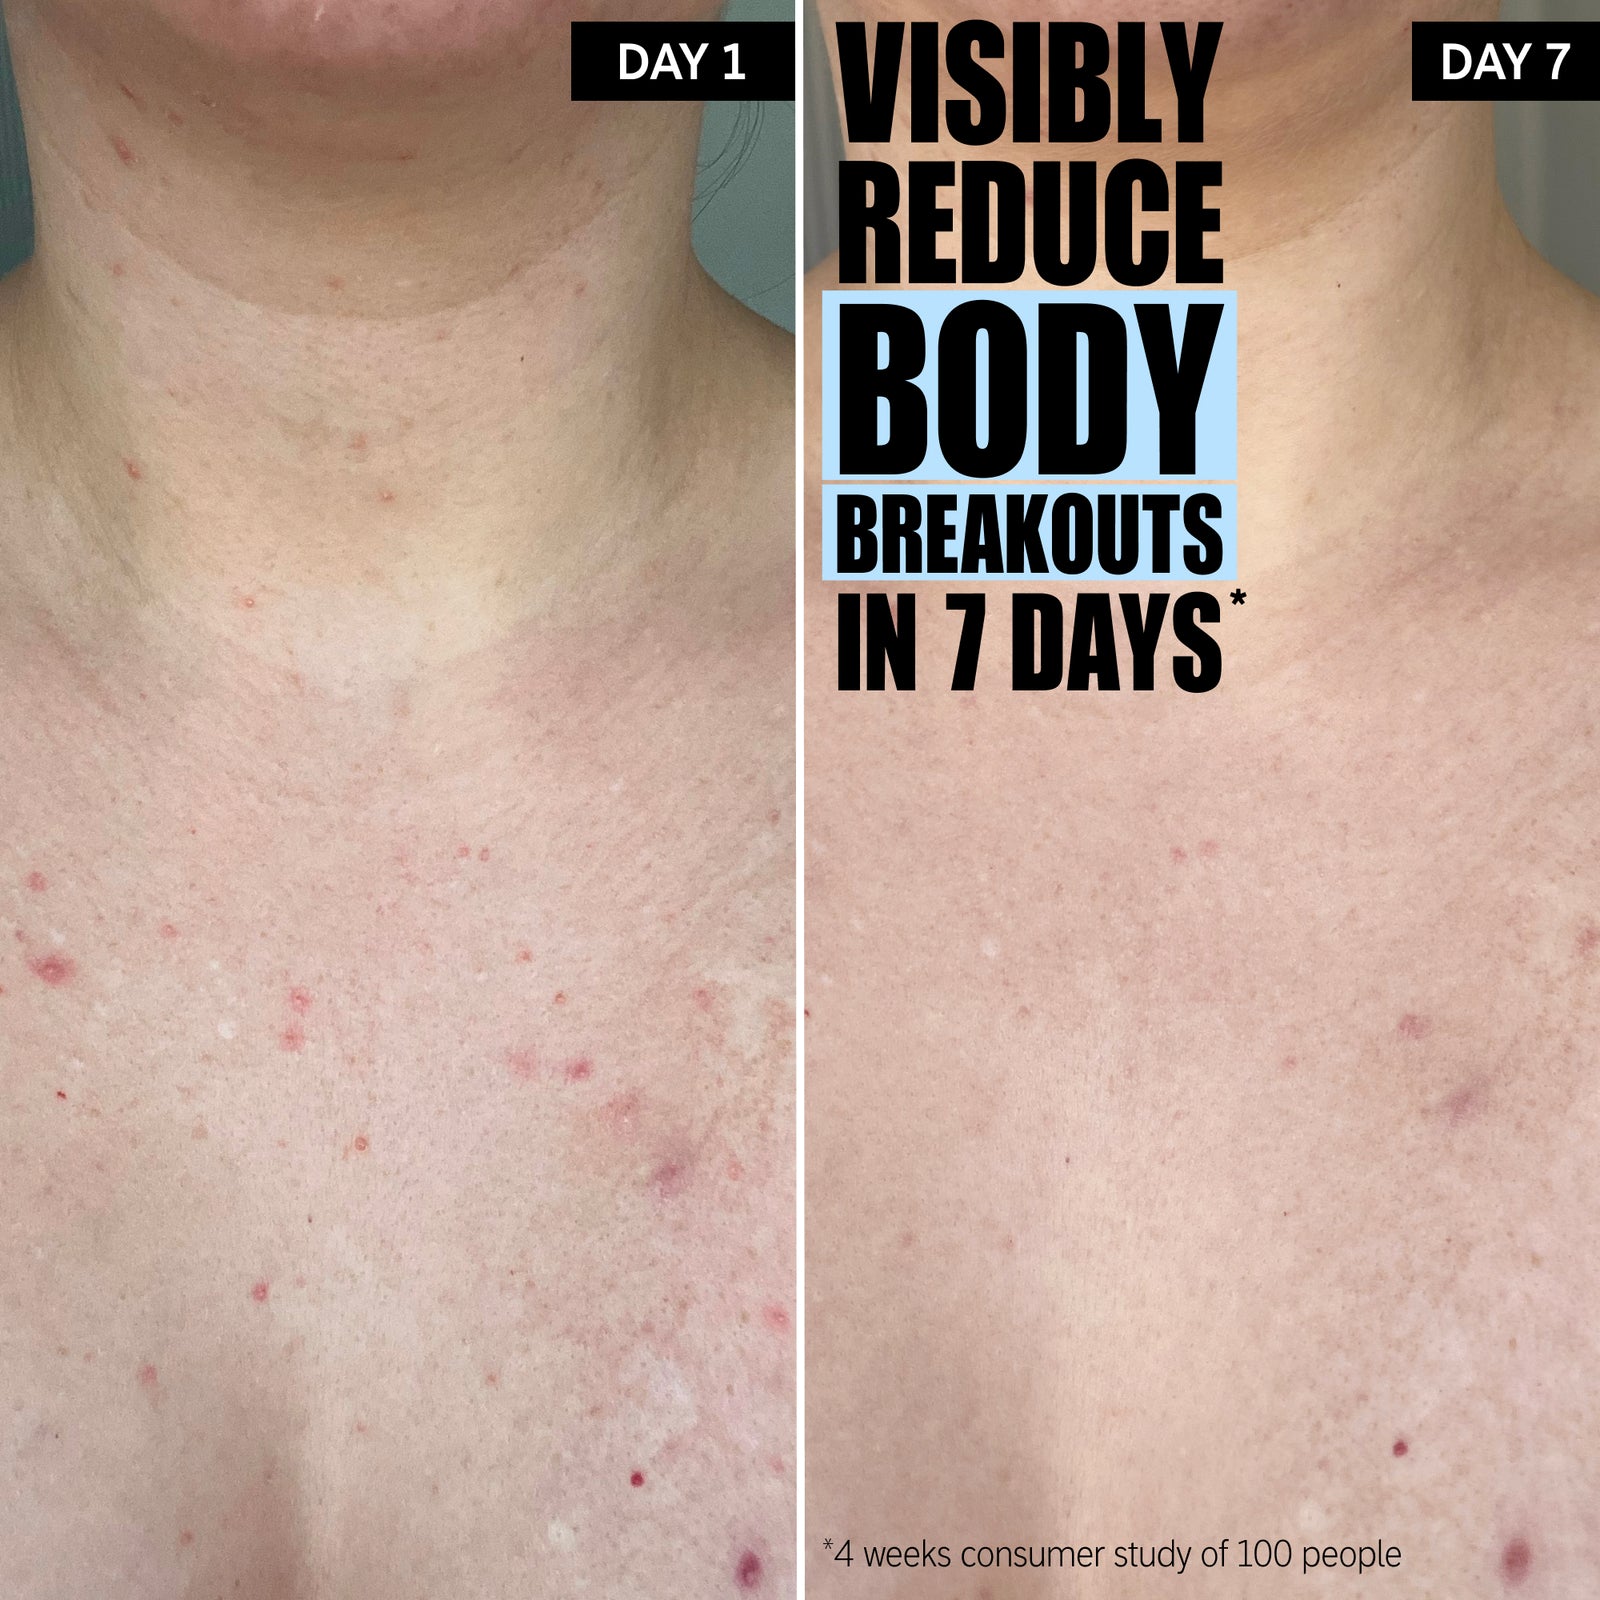 Visibly reduces body breakouts in 7 days*. Progress after 7 days.